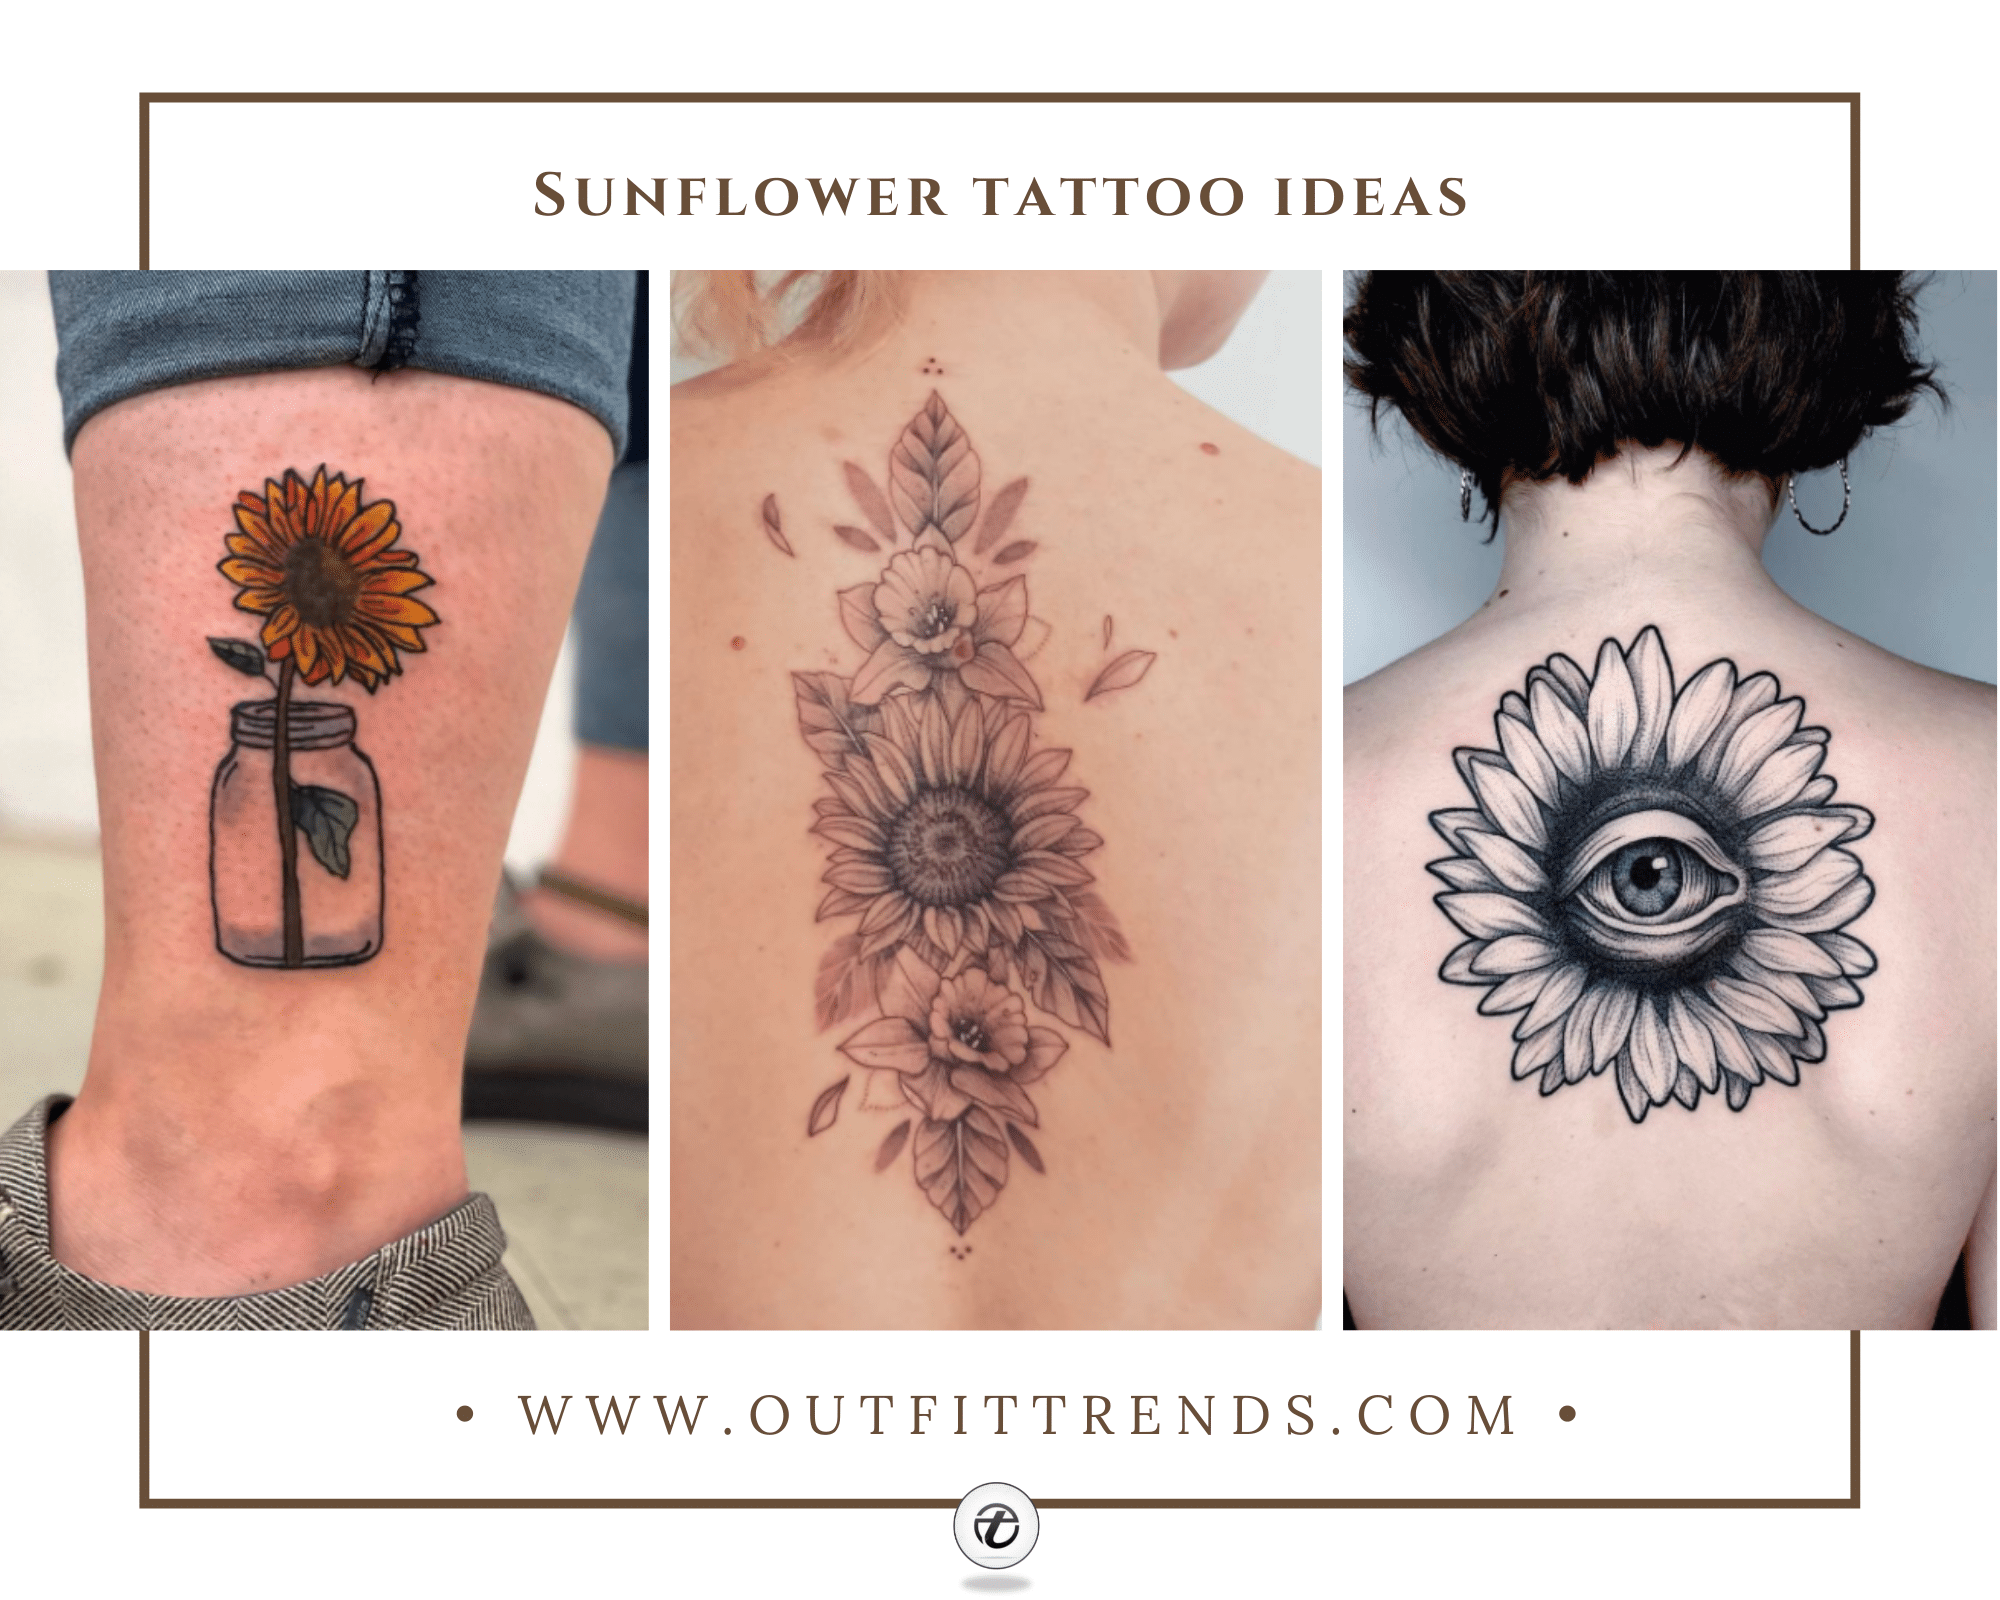 101 Best Sunflower Ankle Tattoo Ideas That Will Blow Your Mind! - Outsons